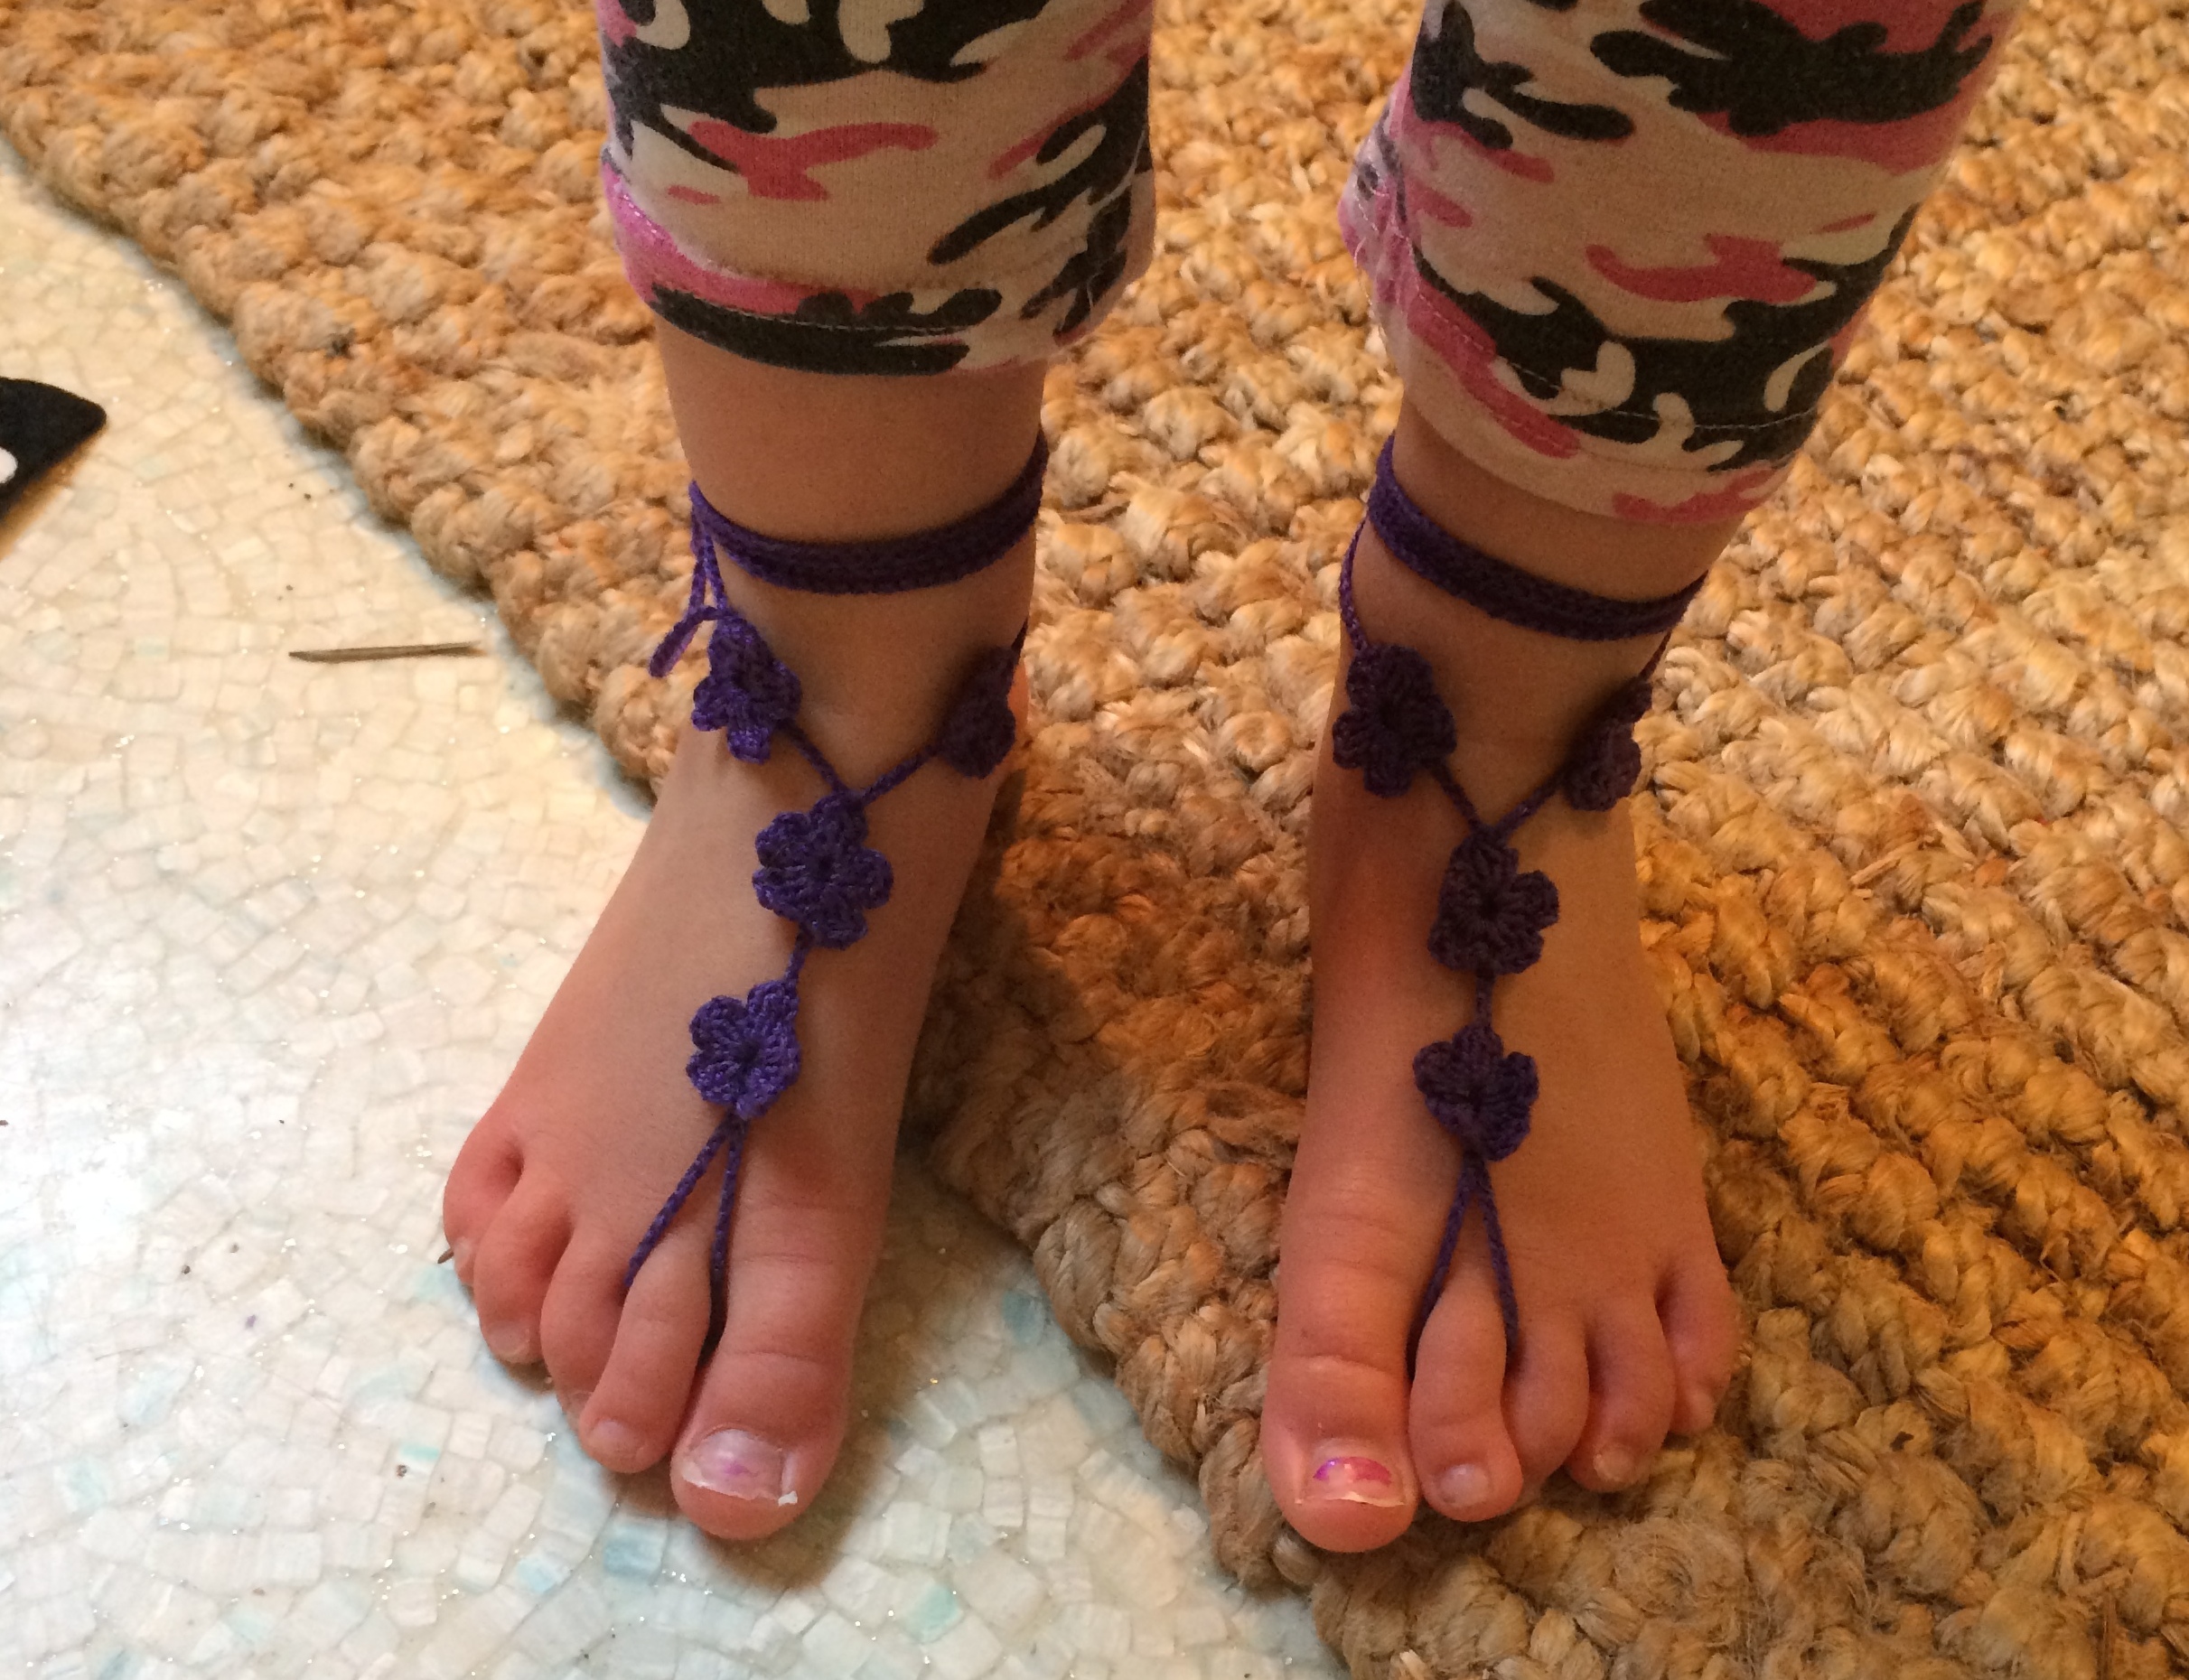 A Podiatrist on Kid Feet, Shoes, and Orthotics - Nutritious Movement